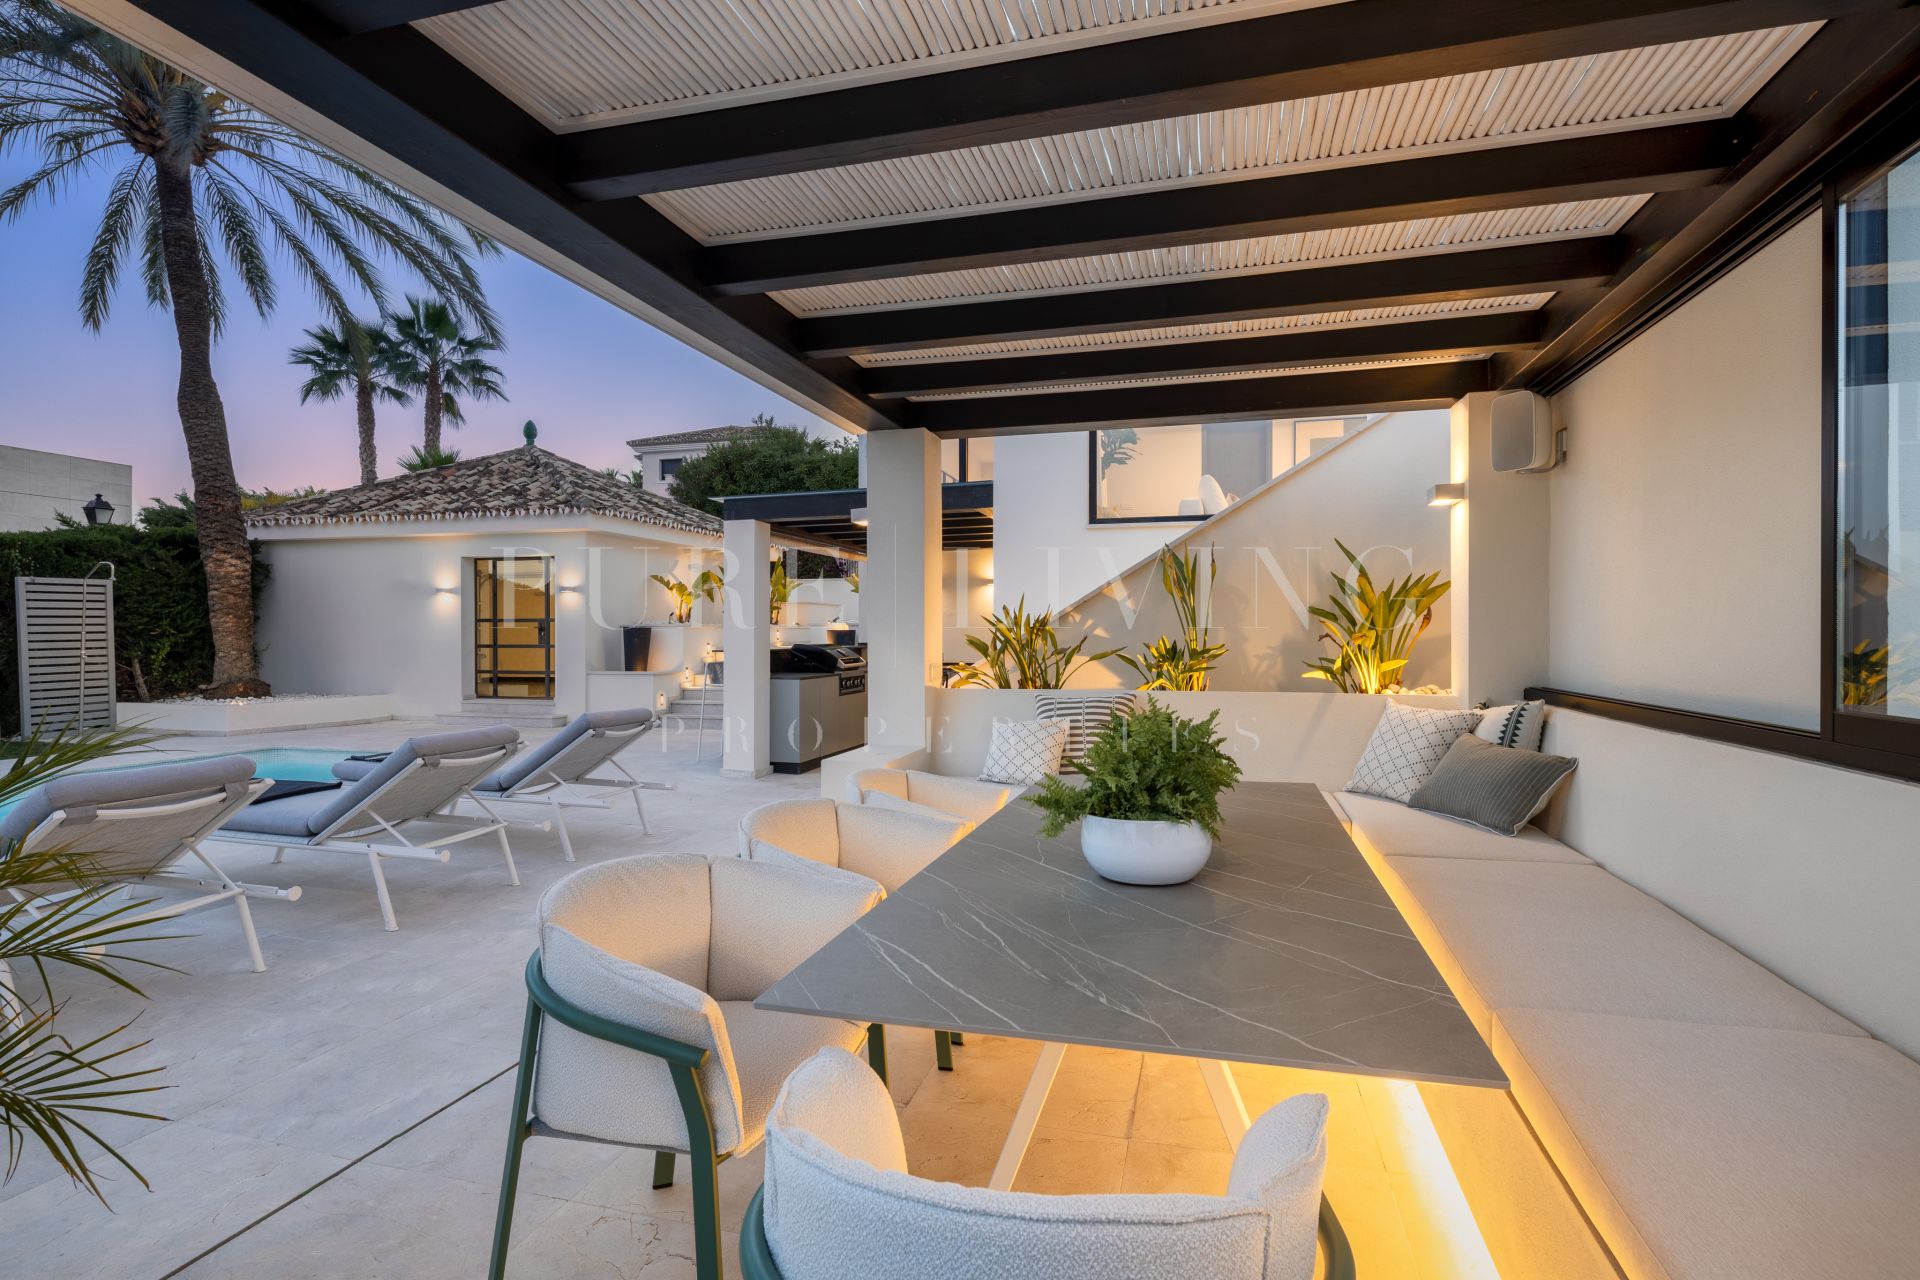 A stunning recently renovated villa located in the exclusive Los Naranjos Hill Club